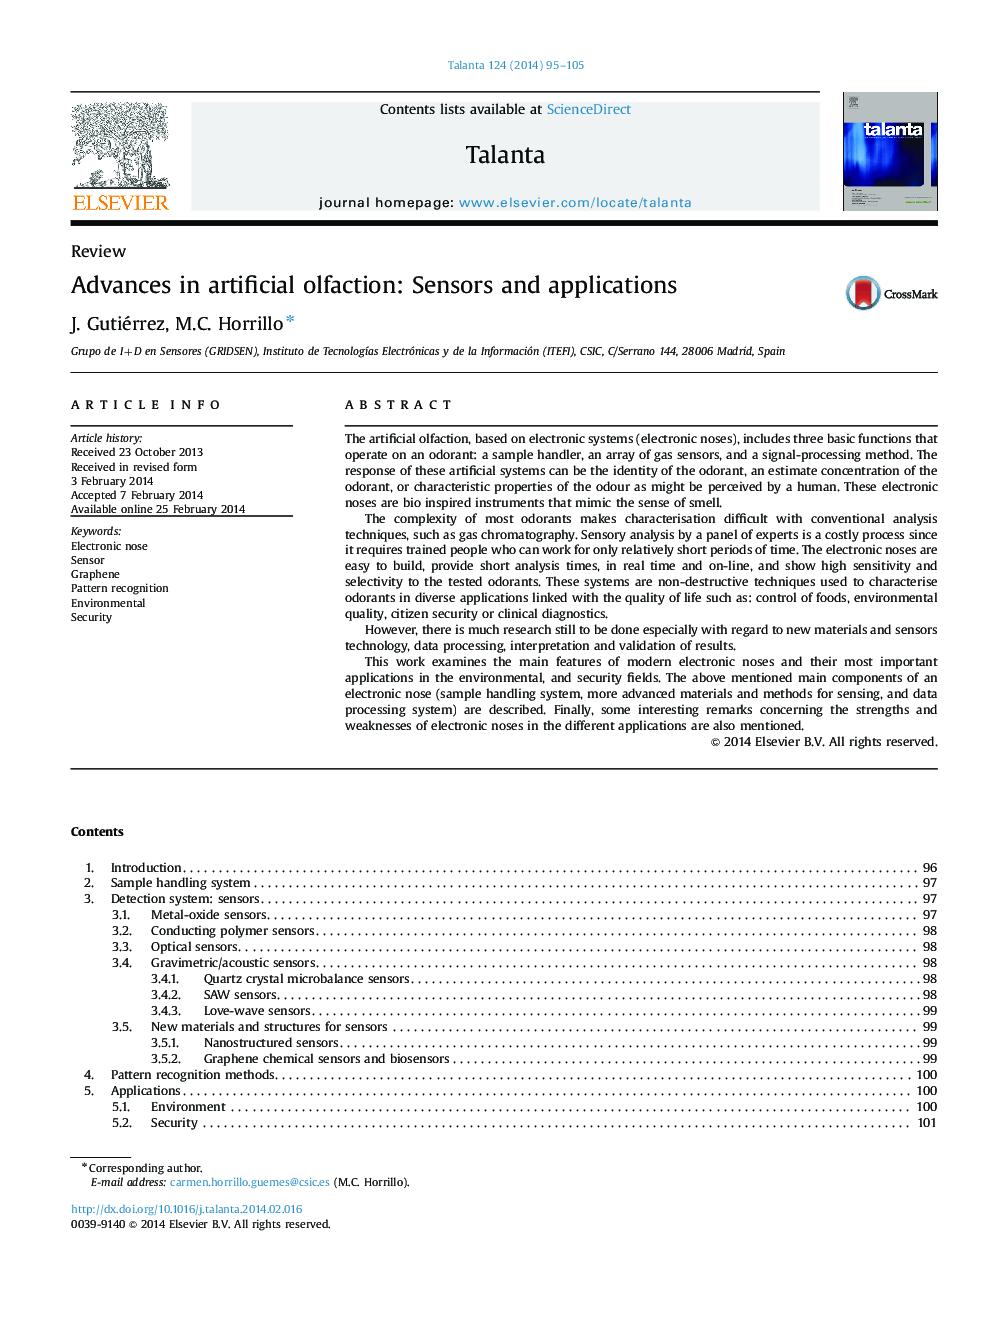 Advances in artificial olfaction: Sensors and applications